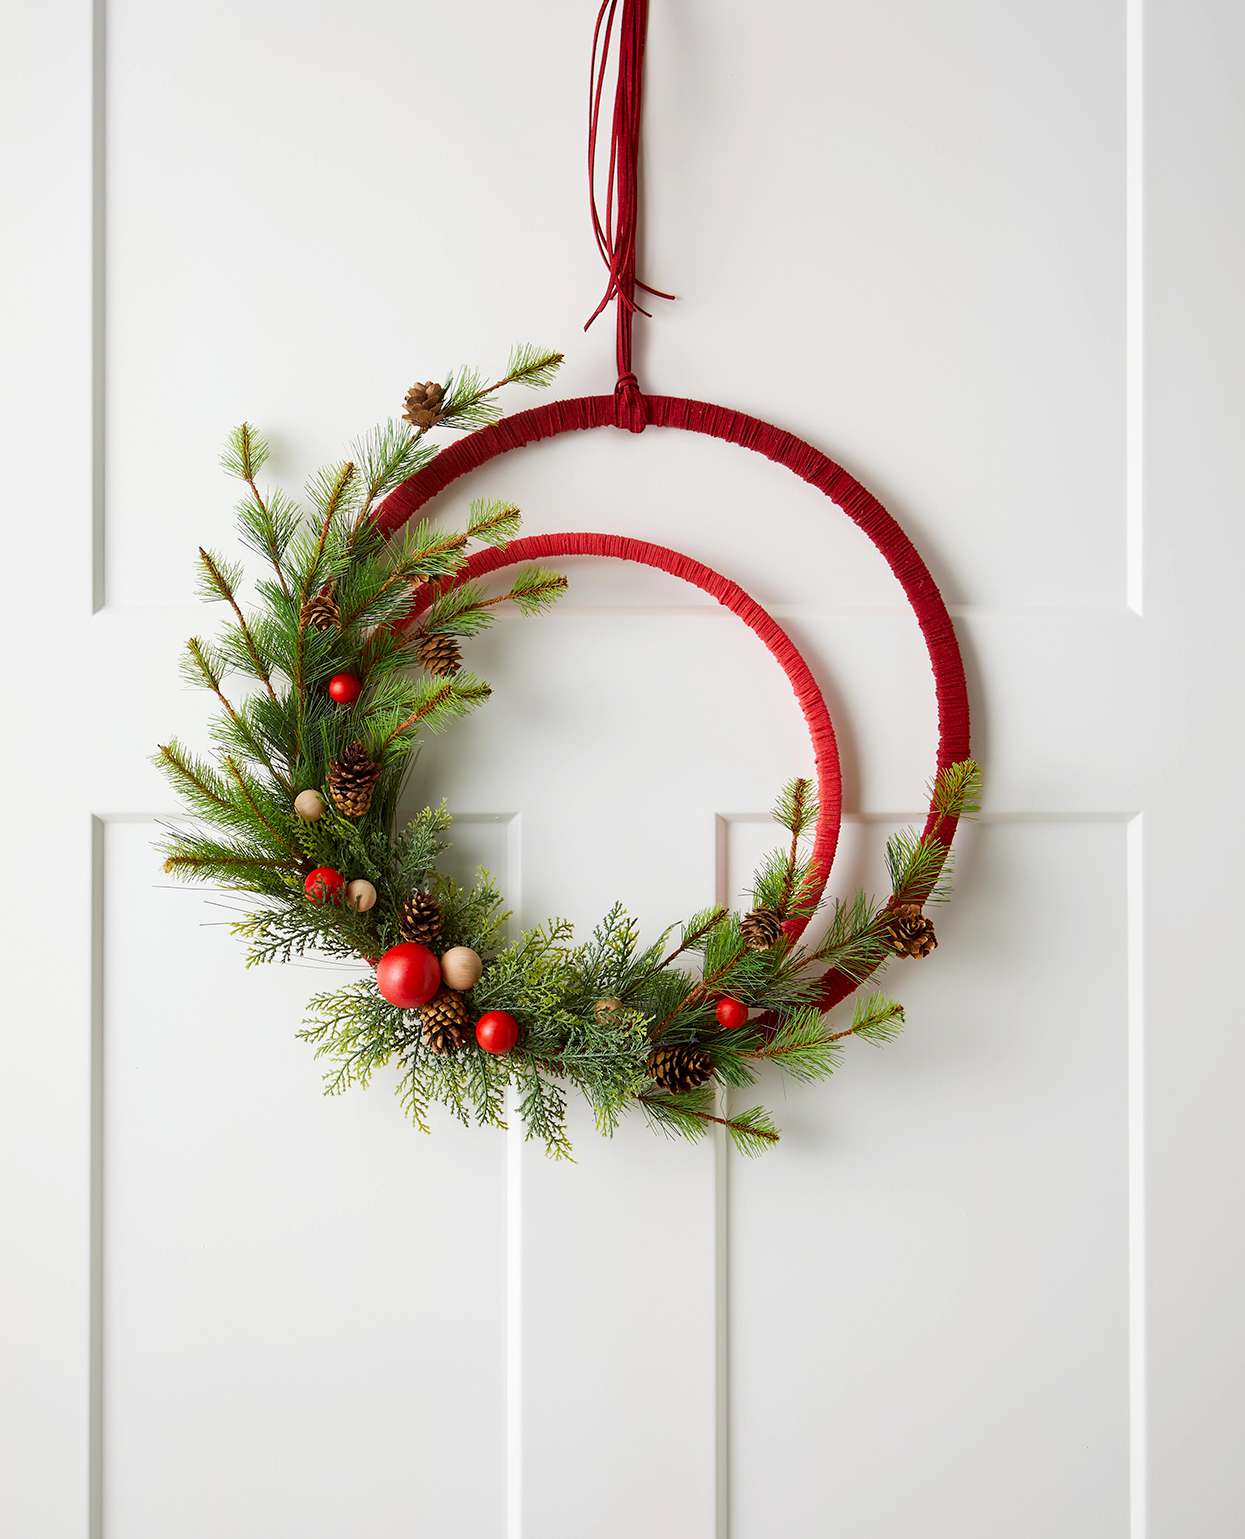 Christmas Wreath Decorations Indoor Holiday Decorative 20 Christmas Wreaths for Front Door Outside Crutches Decorations Xmas Party Indoors and Outdoors Home Decor 